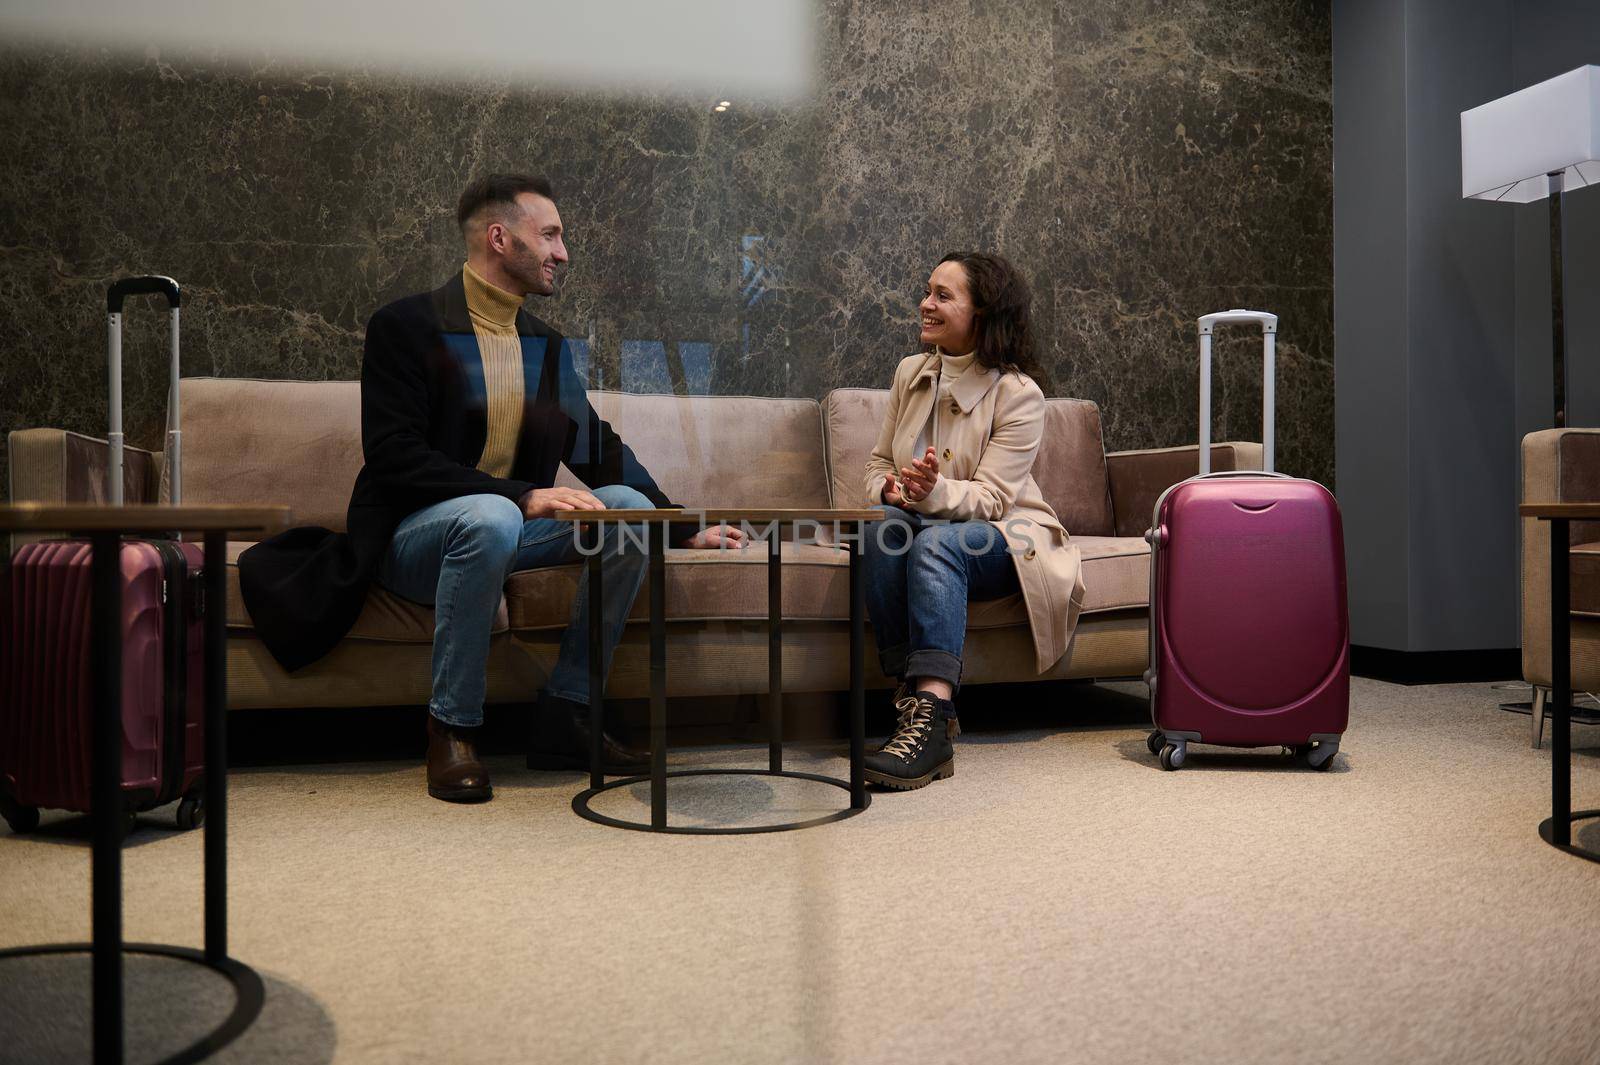 Married couple with suitcases, colleagues, team, partners on a business trip discussing plans and projects in a VIP lounge meeting room while waiting for flight in the airport departure terminal